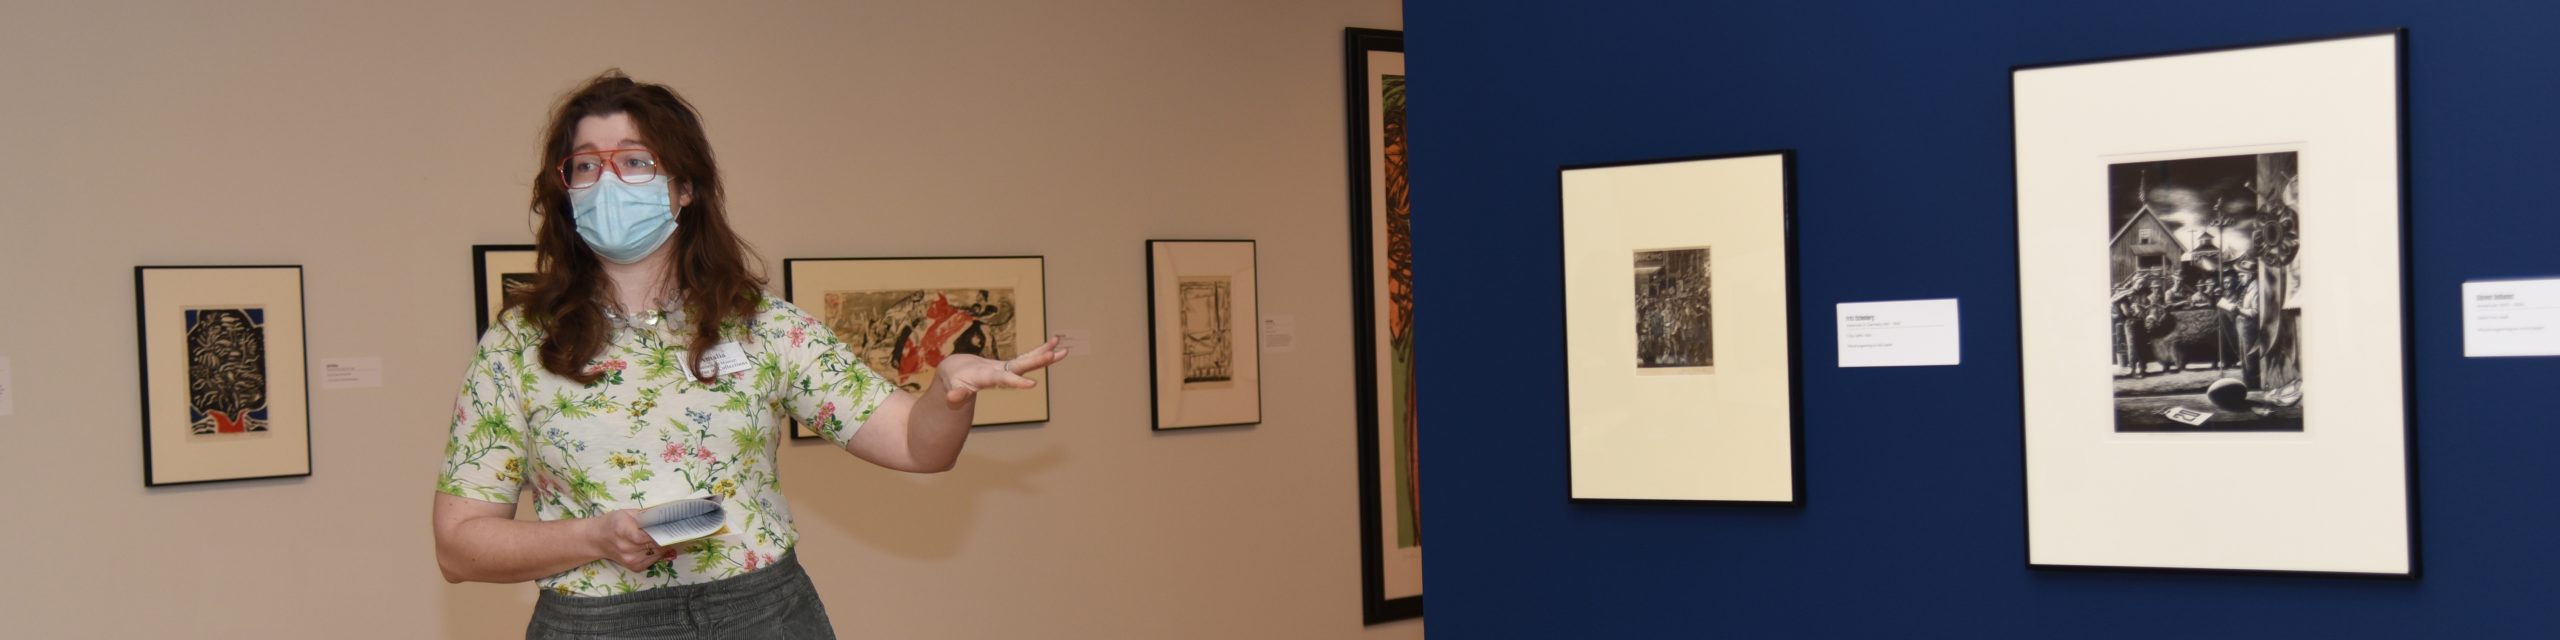 curator pointing to two black and white drawings